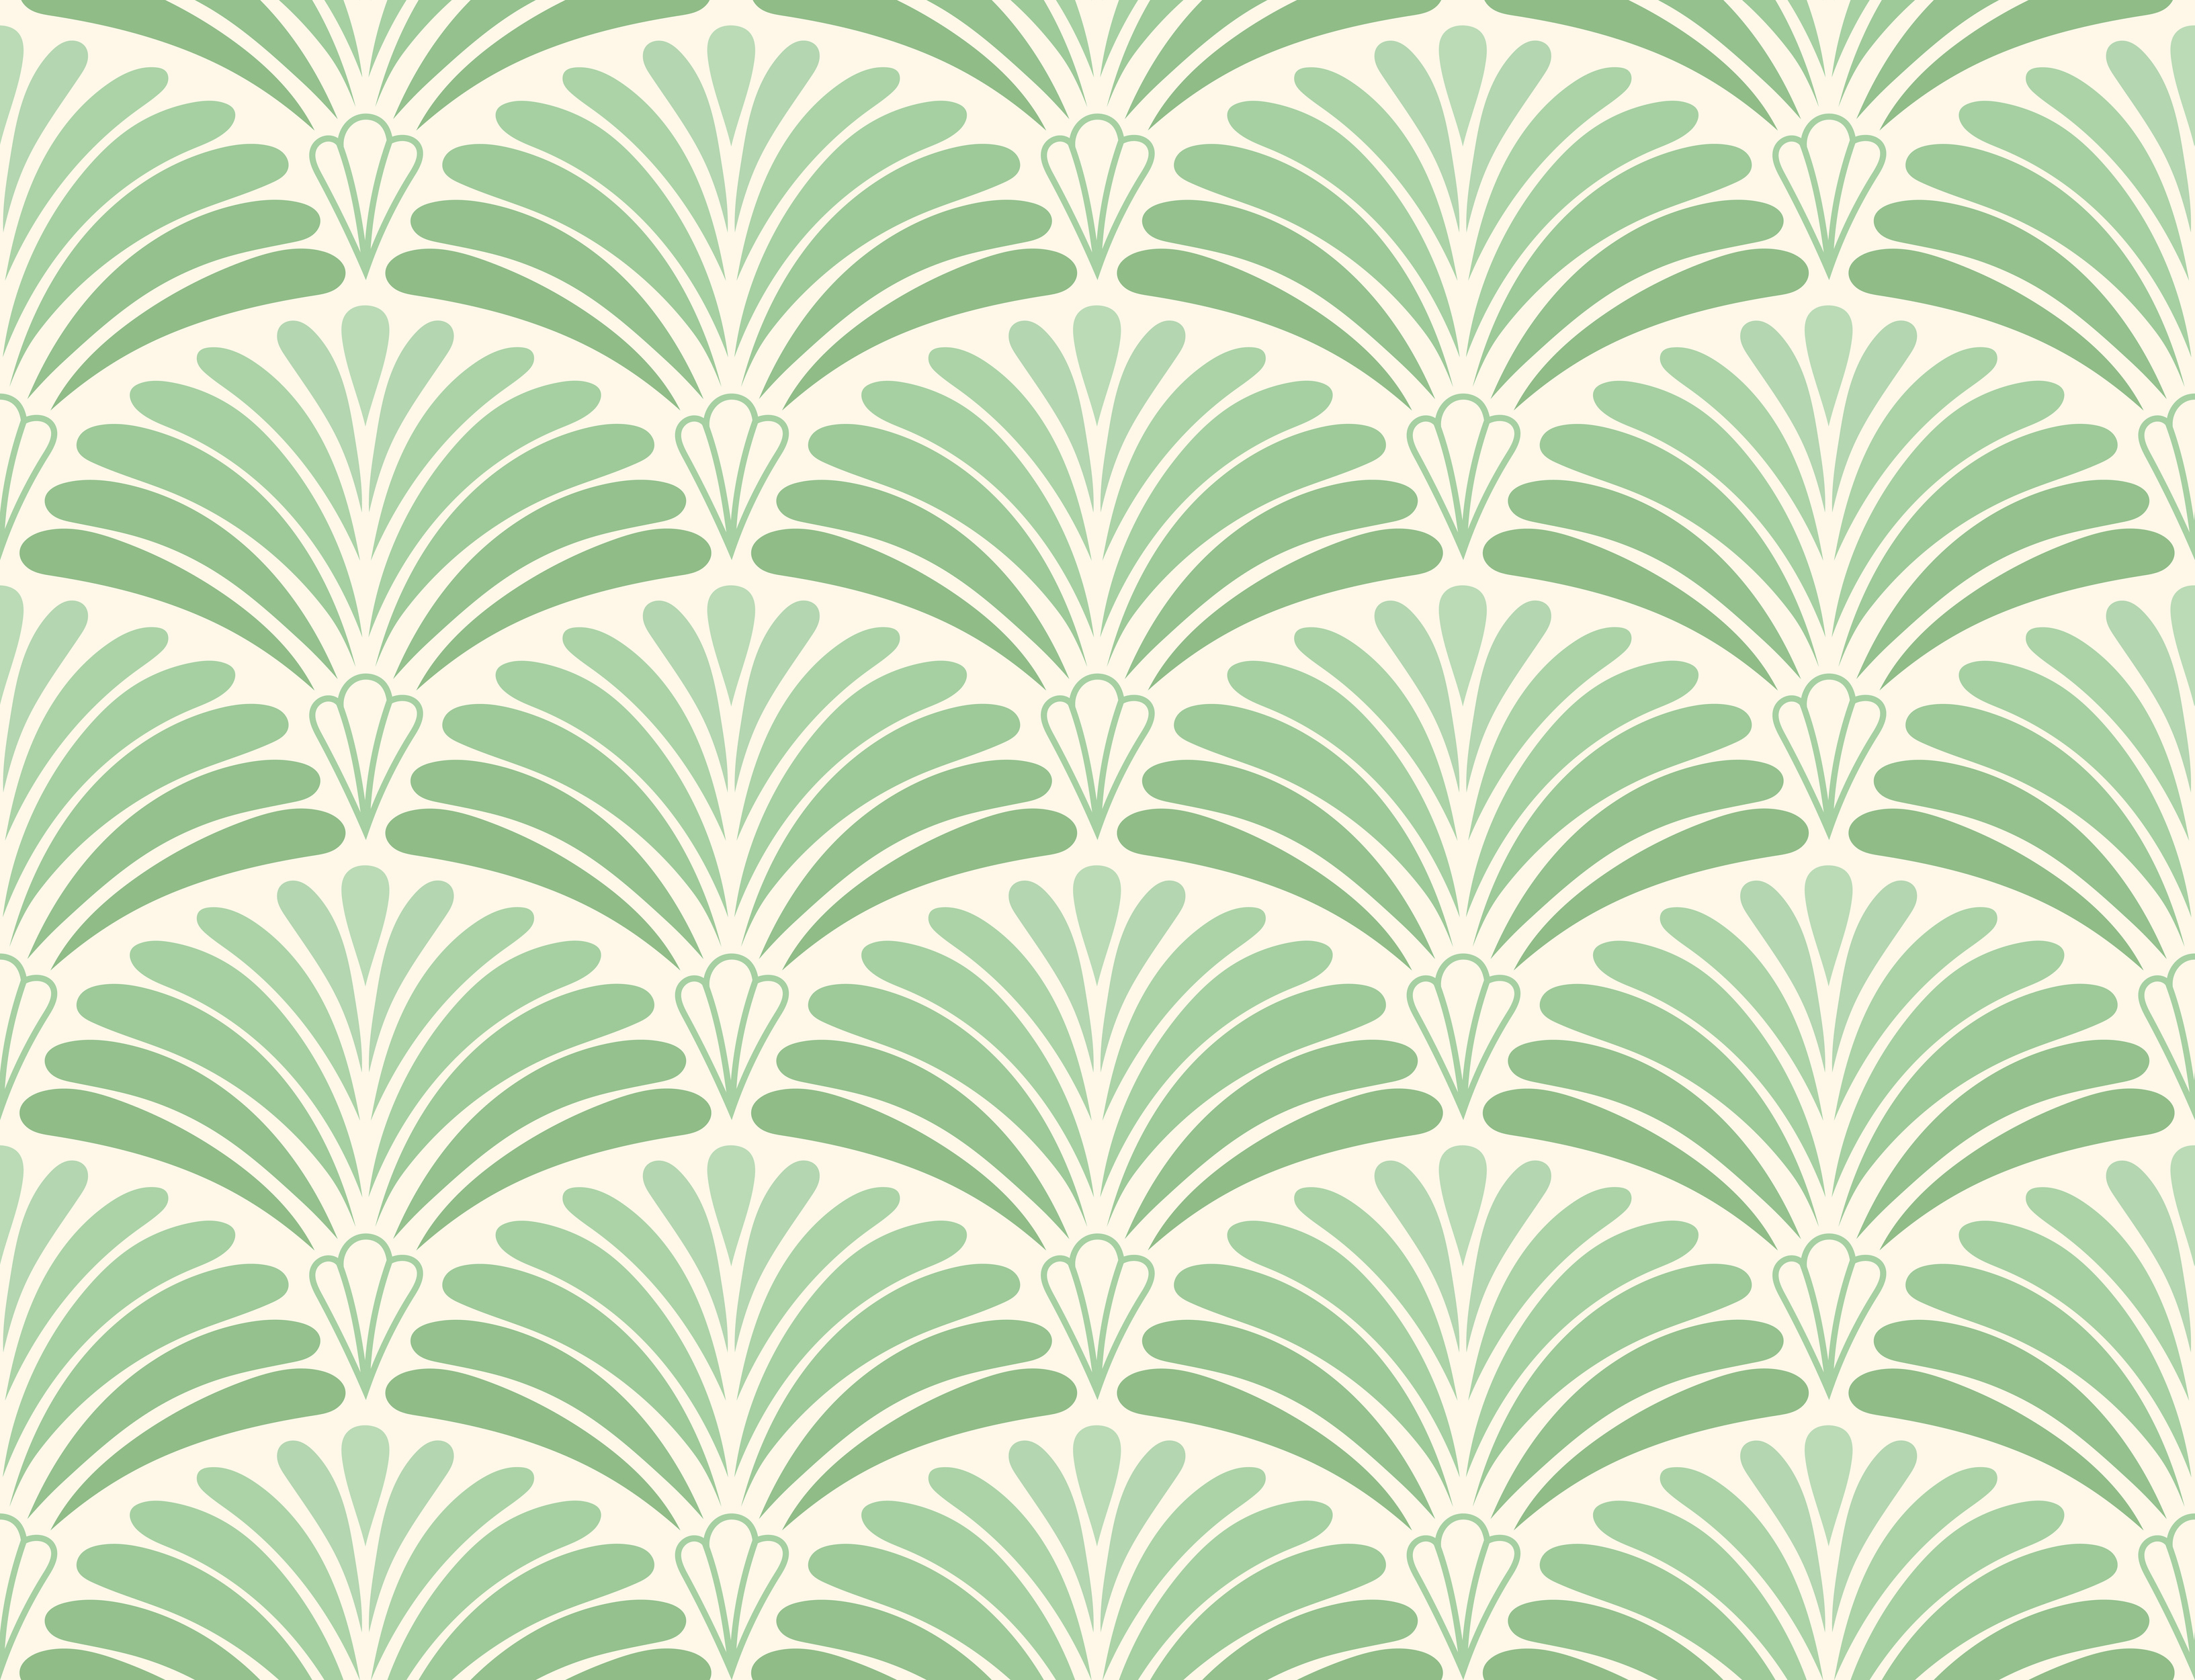 Seamless art deco abstract pattern